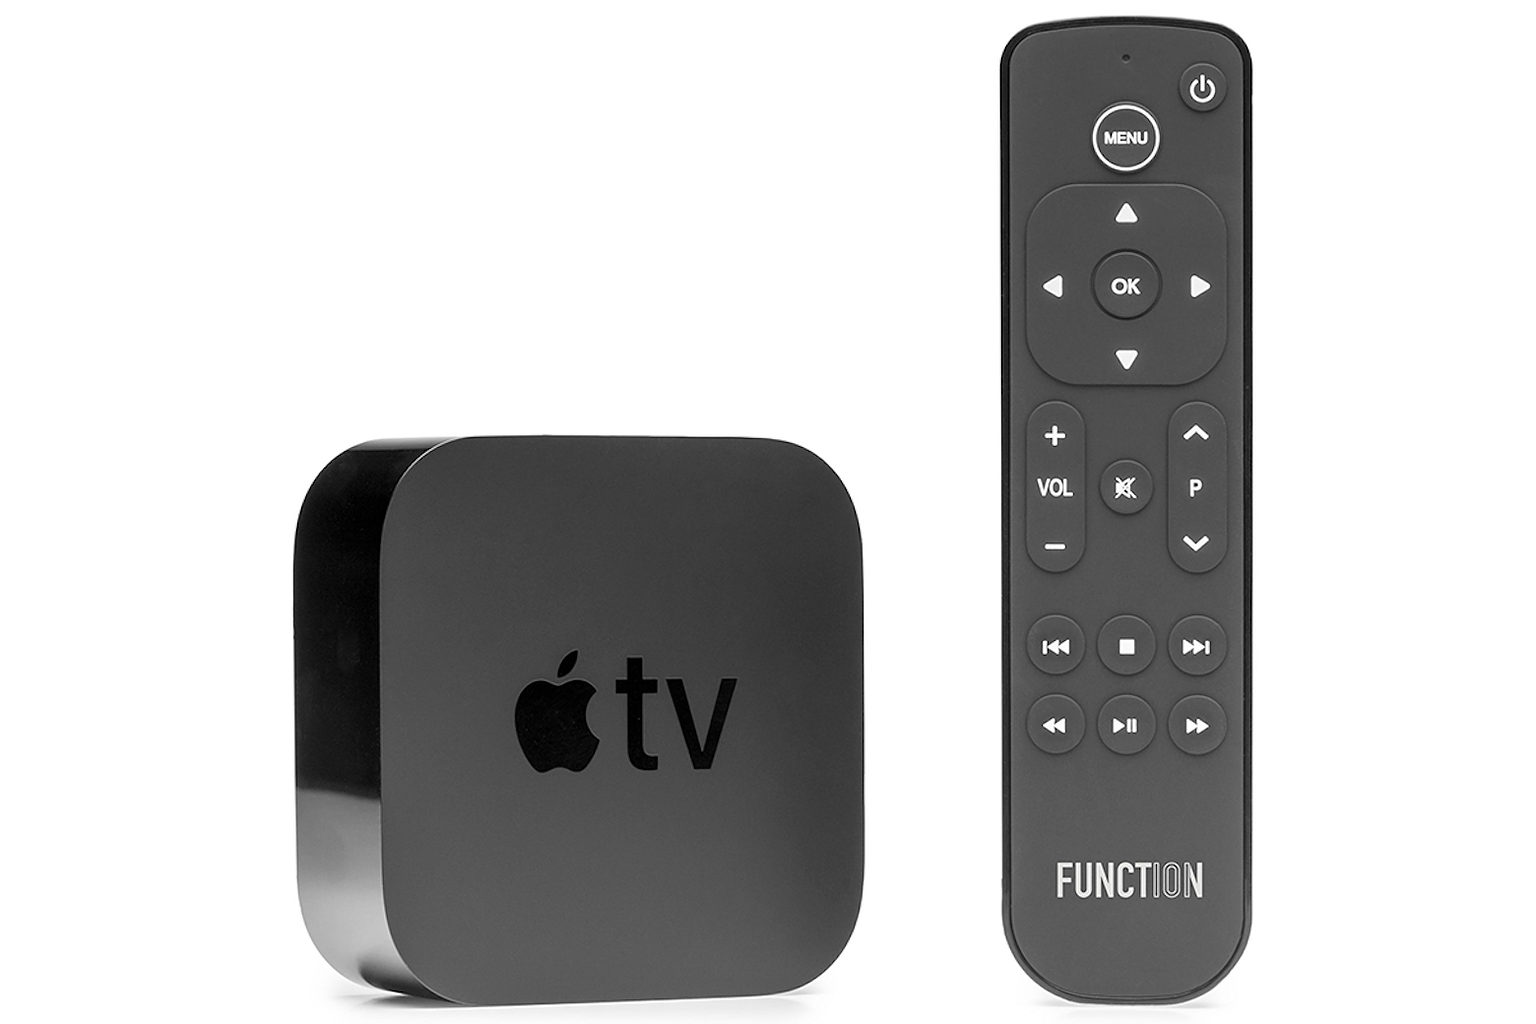 This affordable button remote gives you complete control of Apple TV devices at a discounted cost.